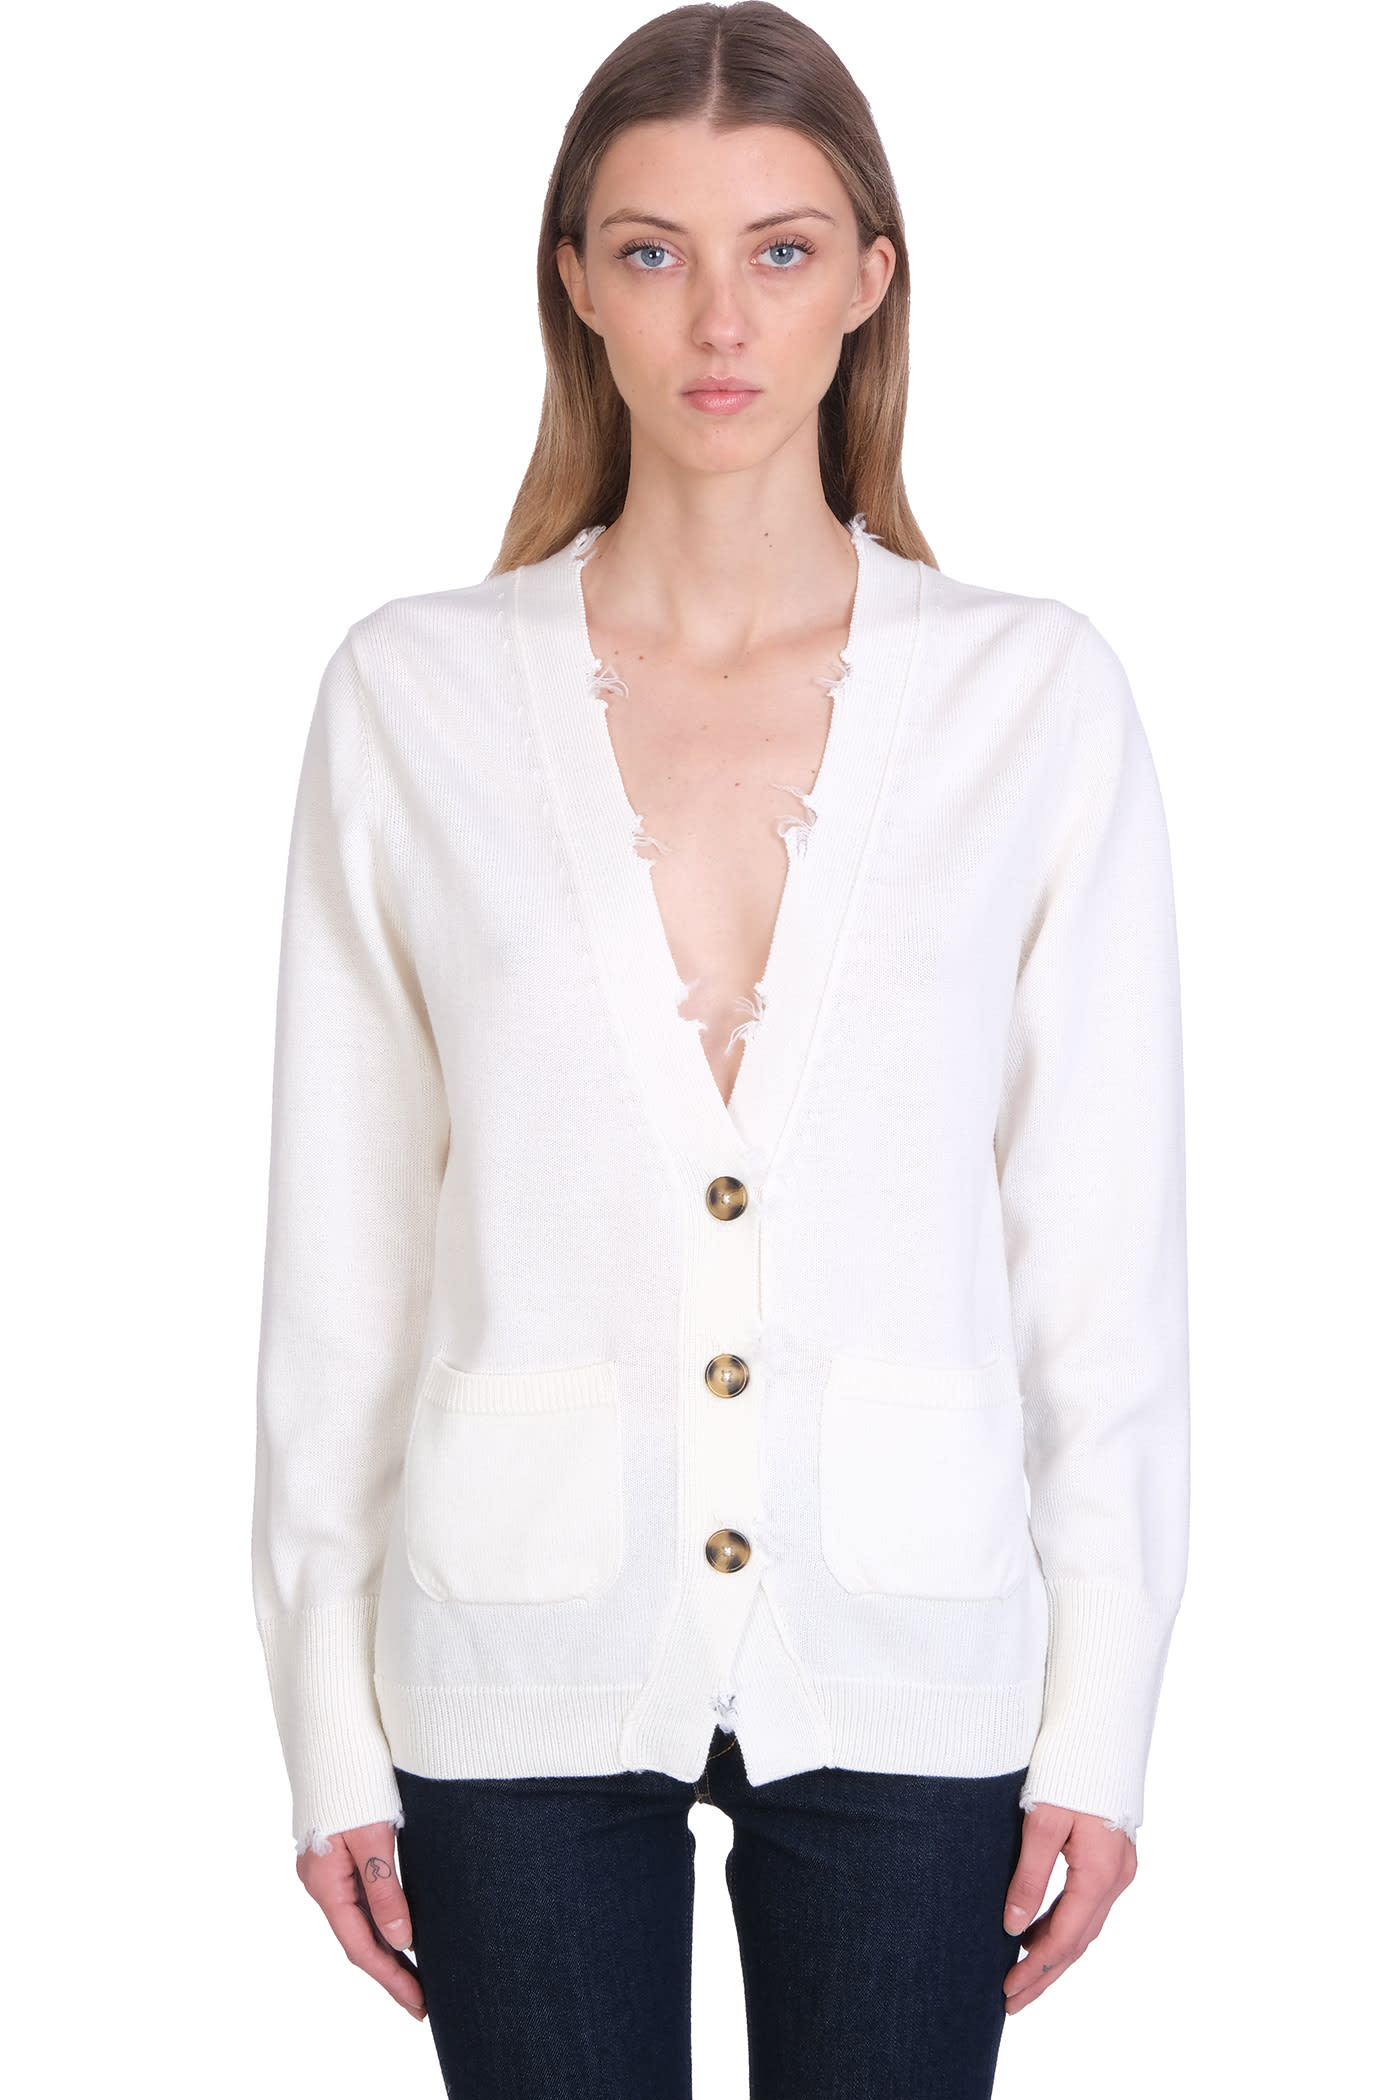 LAutre Chose Cardigan In White Wool